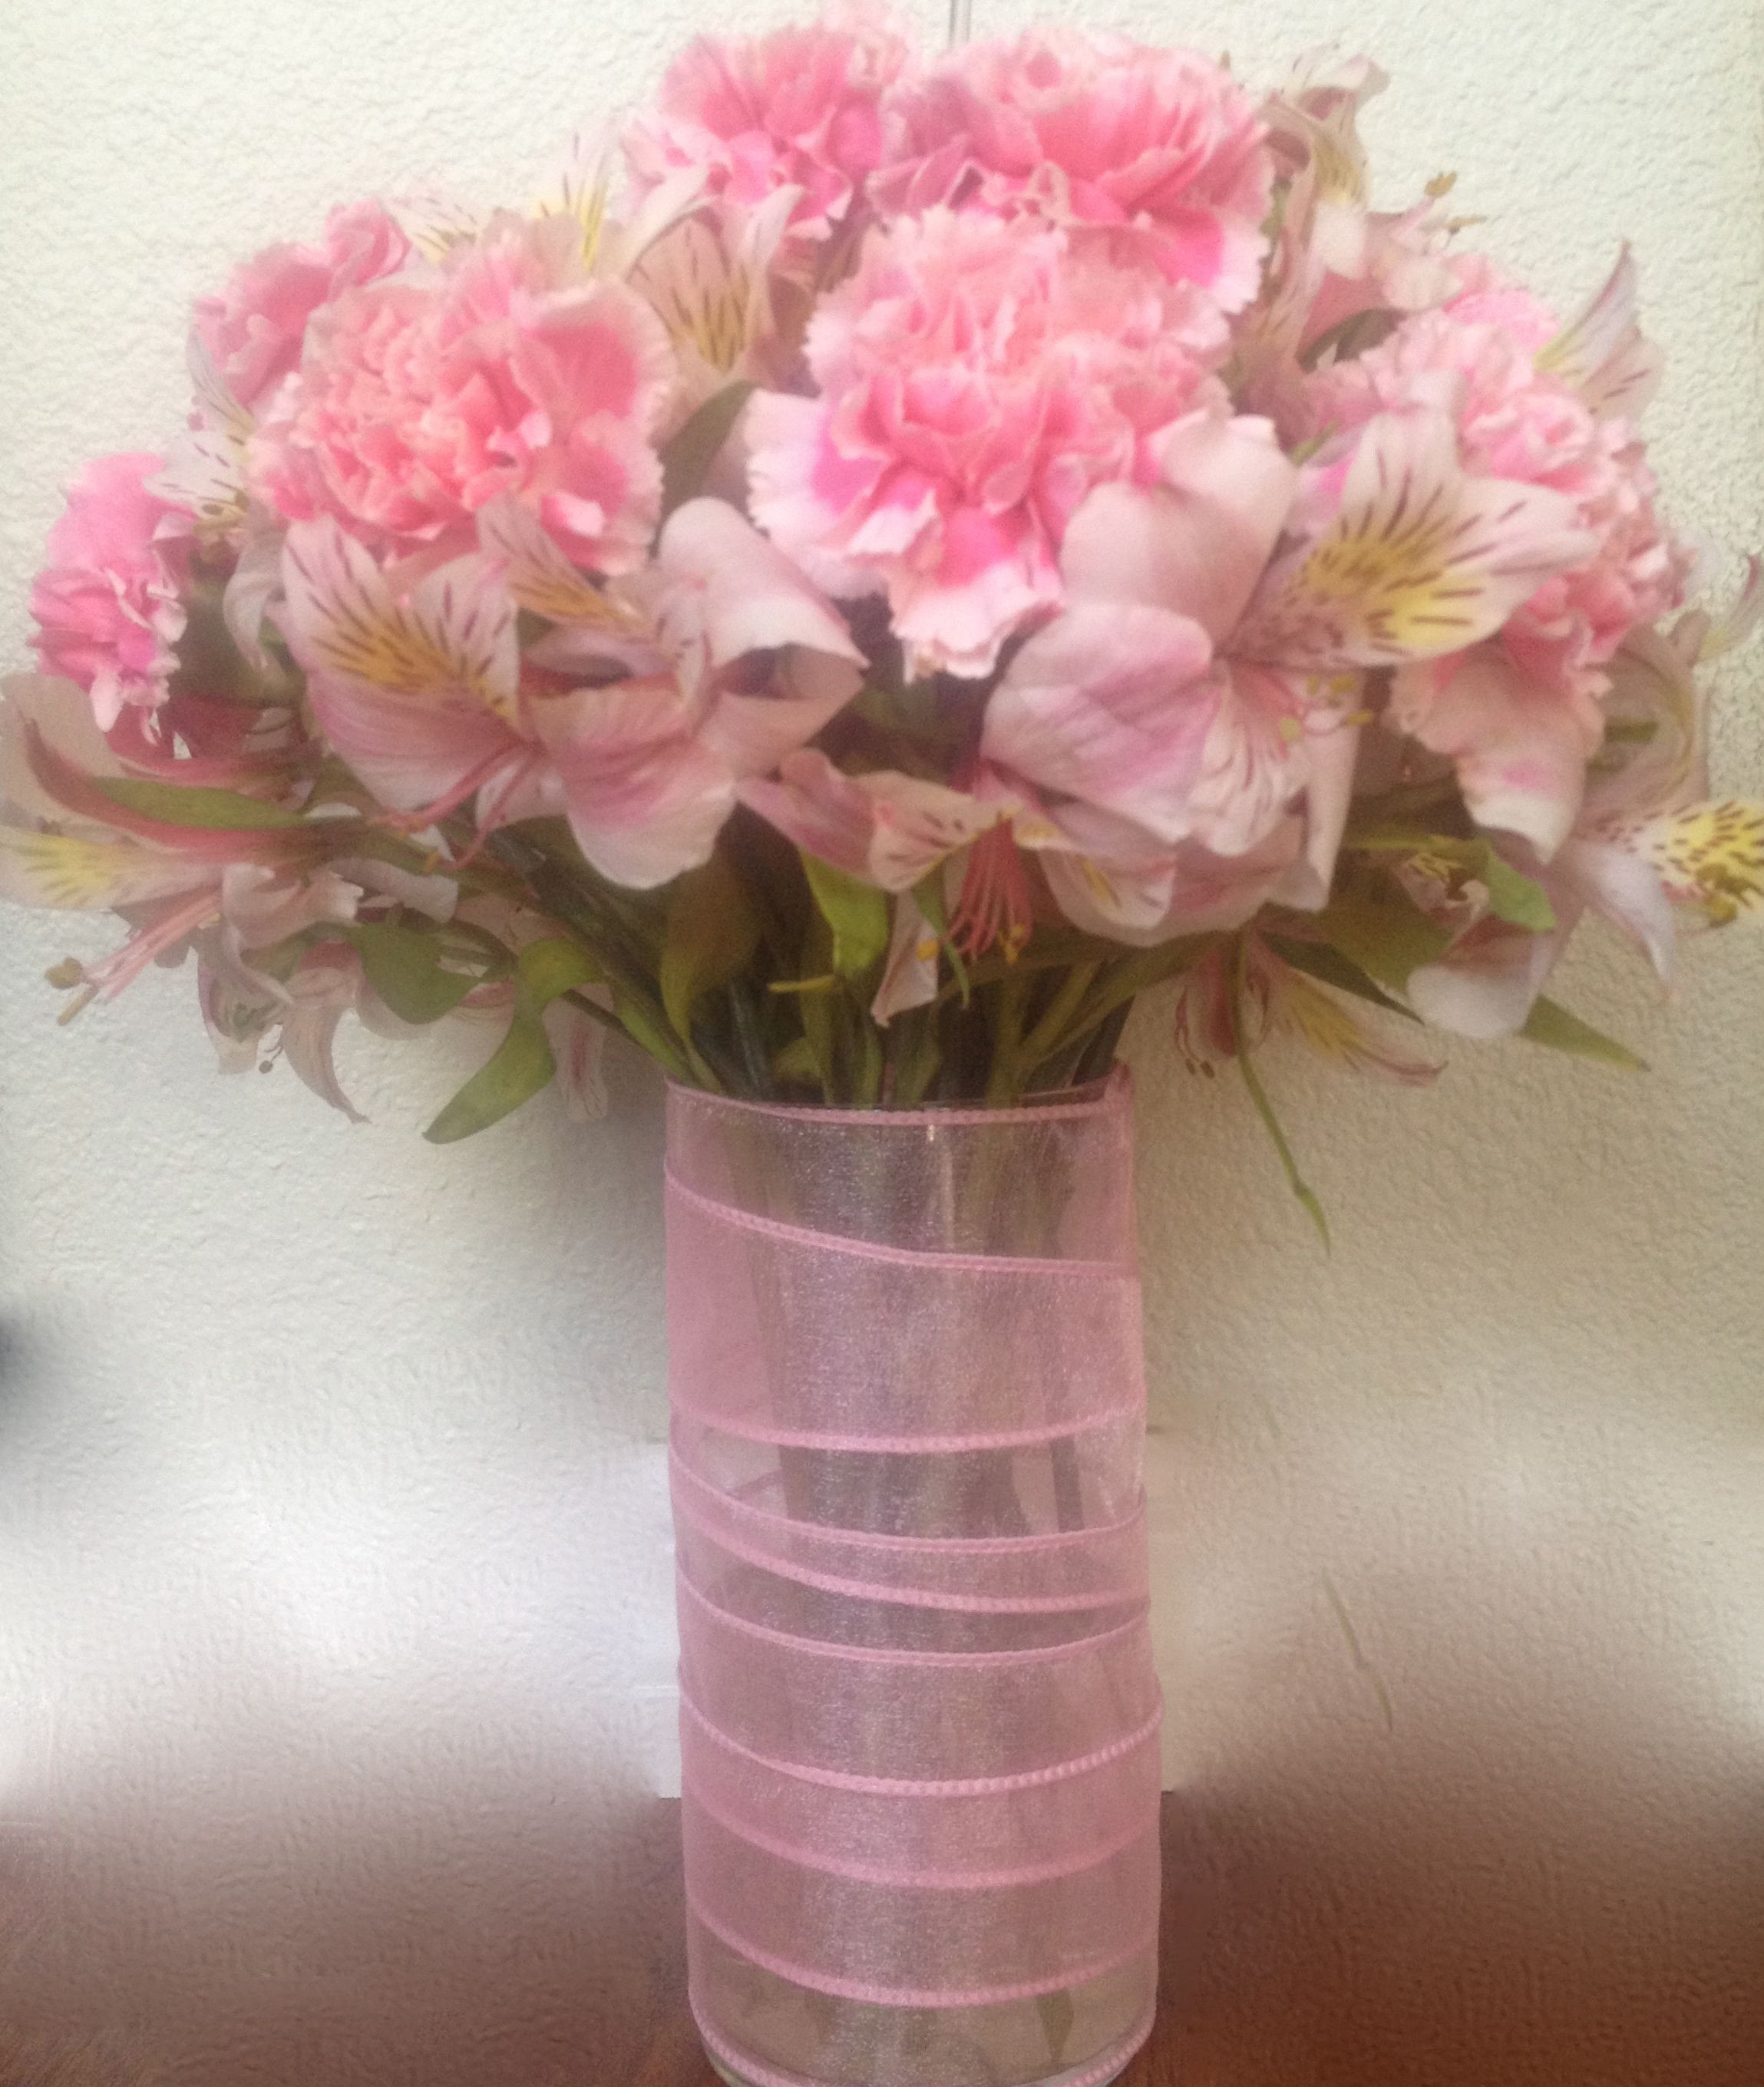 14 Fantastic Blush Pink Glass Vase 2024 free download blush pink glass vase of its a girl pink carnations alstroemeria in a glass vase wrapped for pink carnations alstroemeria in a glass vase wrapped in pink ribbon